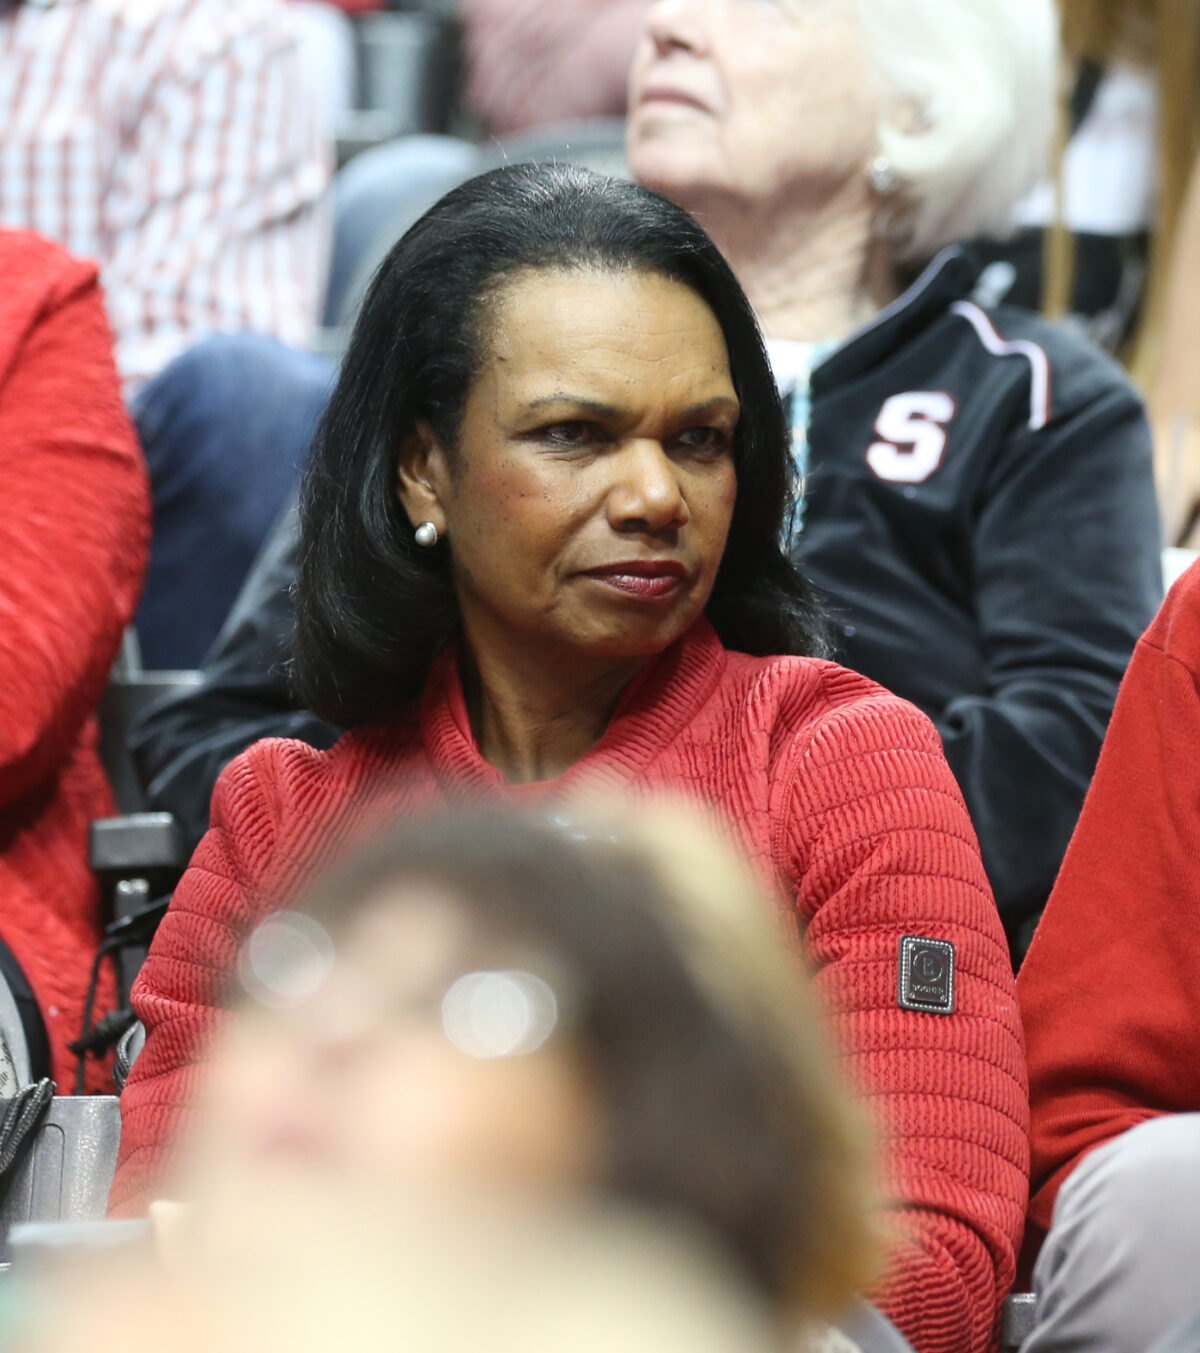 Denver Broncos welcome Condoleezza Rice to their ownership group